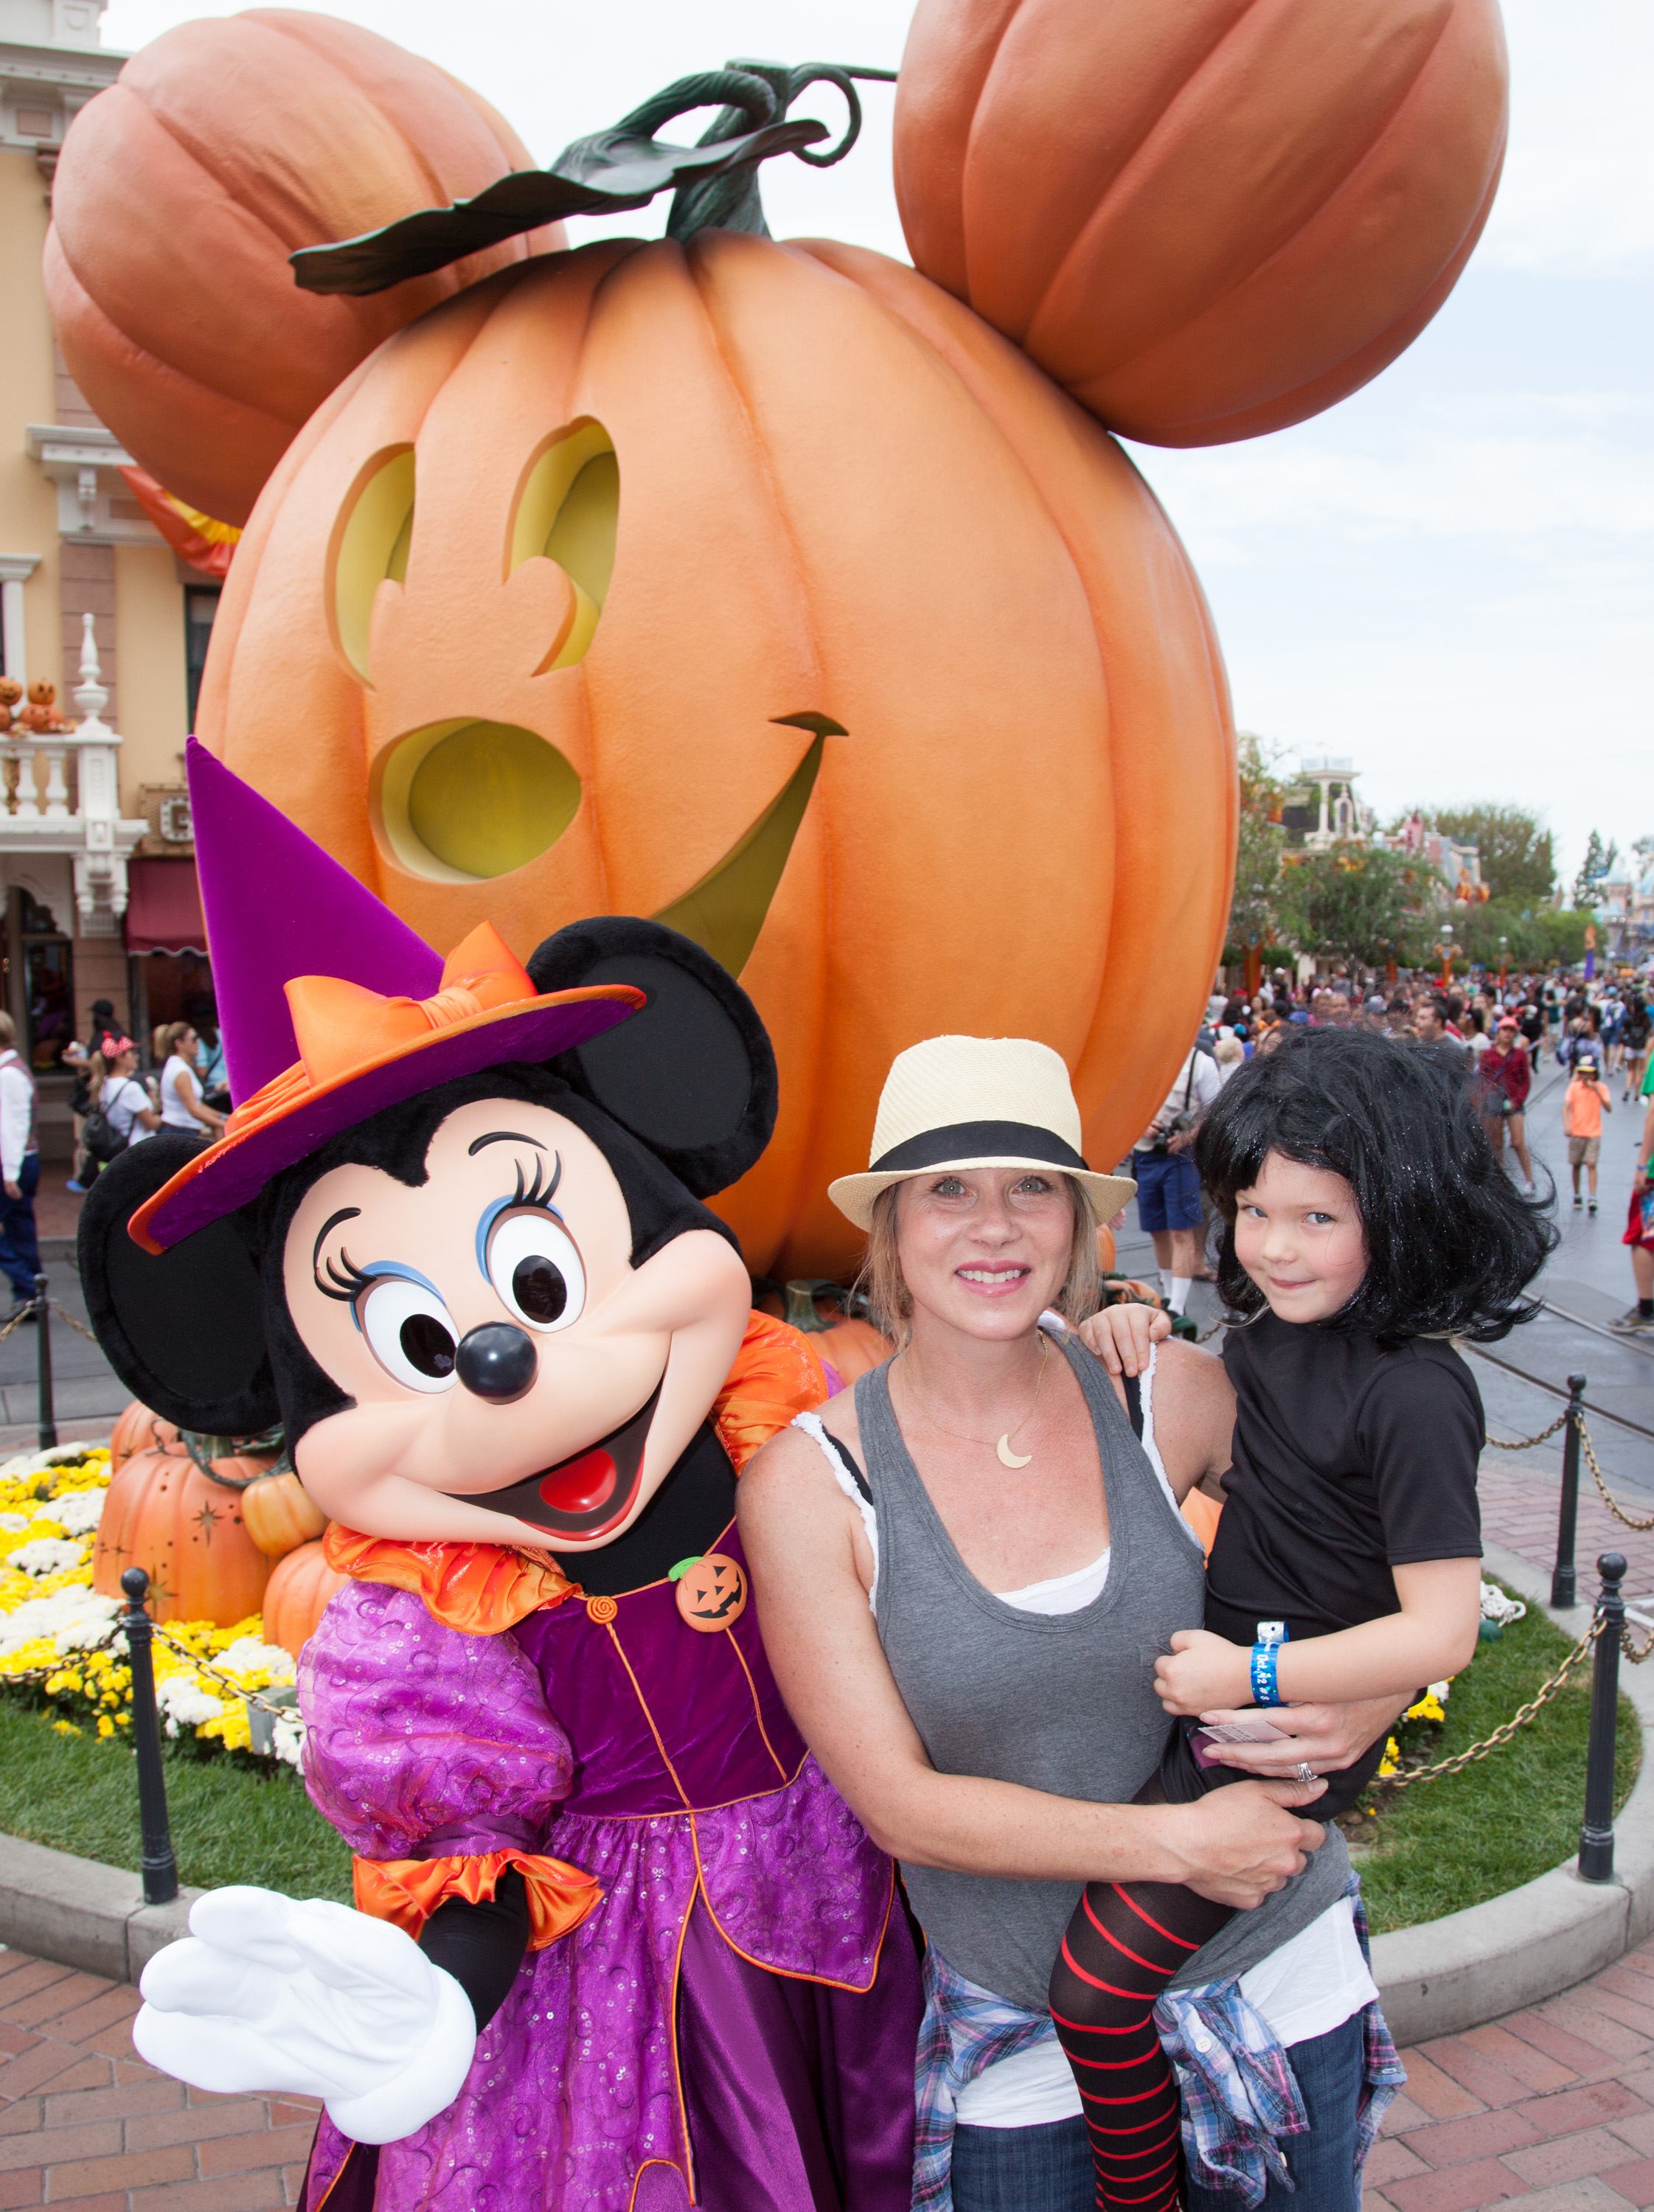 Christina Applegate and  Sadie LeNoble celebrate "Halloween Time" with Minnie Mouse at Disneyland in Anaheim, California, on October 12, 2015. | Source: Getty Images